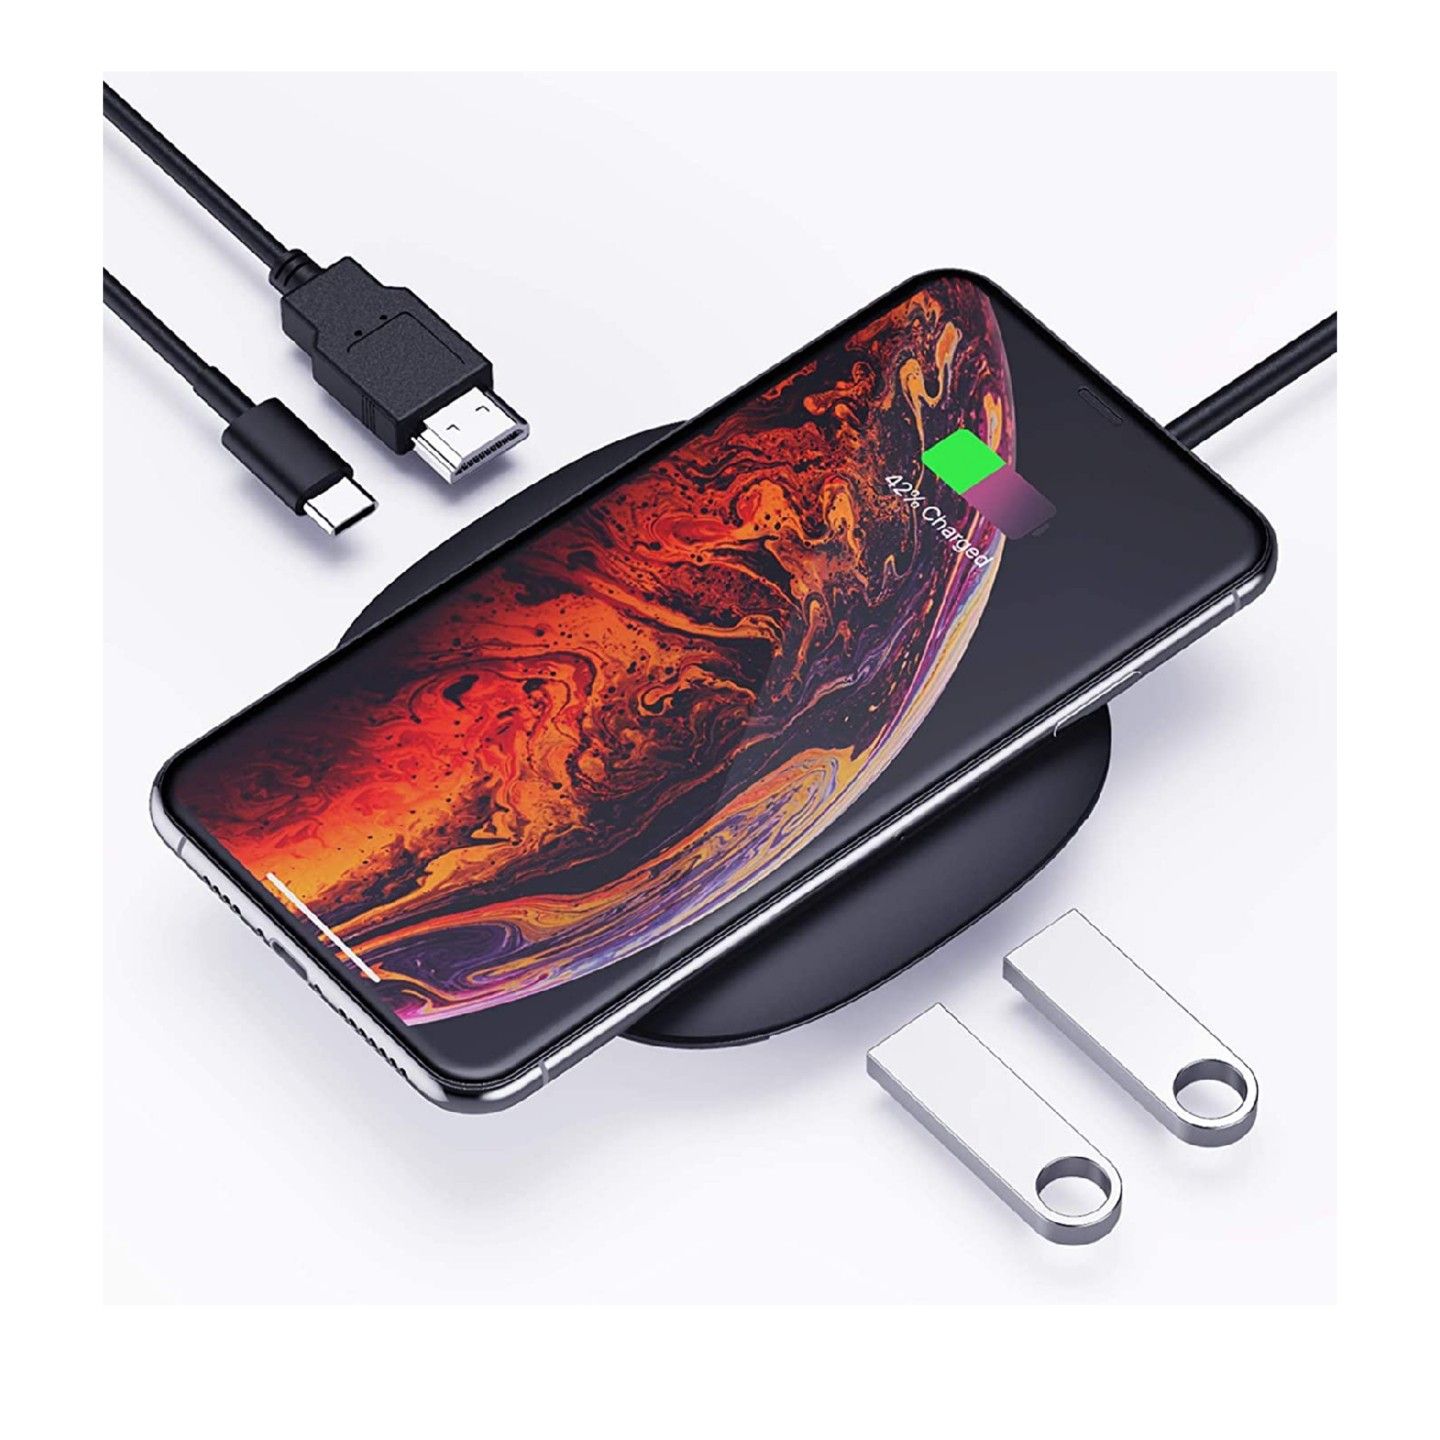 AUKEY USB C Hub - Adapter Wireless Charger 5-in-1 Type-C Hub 2 USB 3.0 Ports